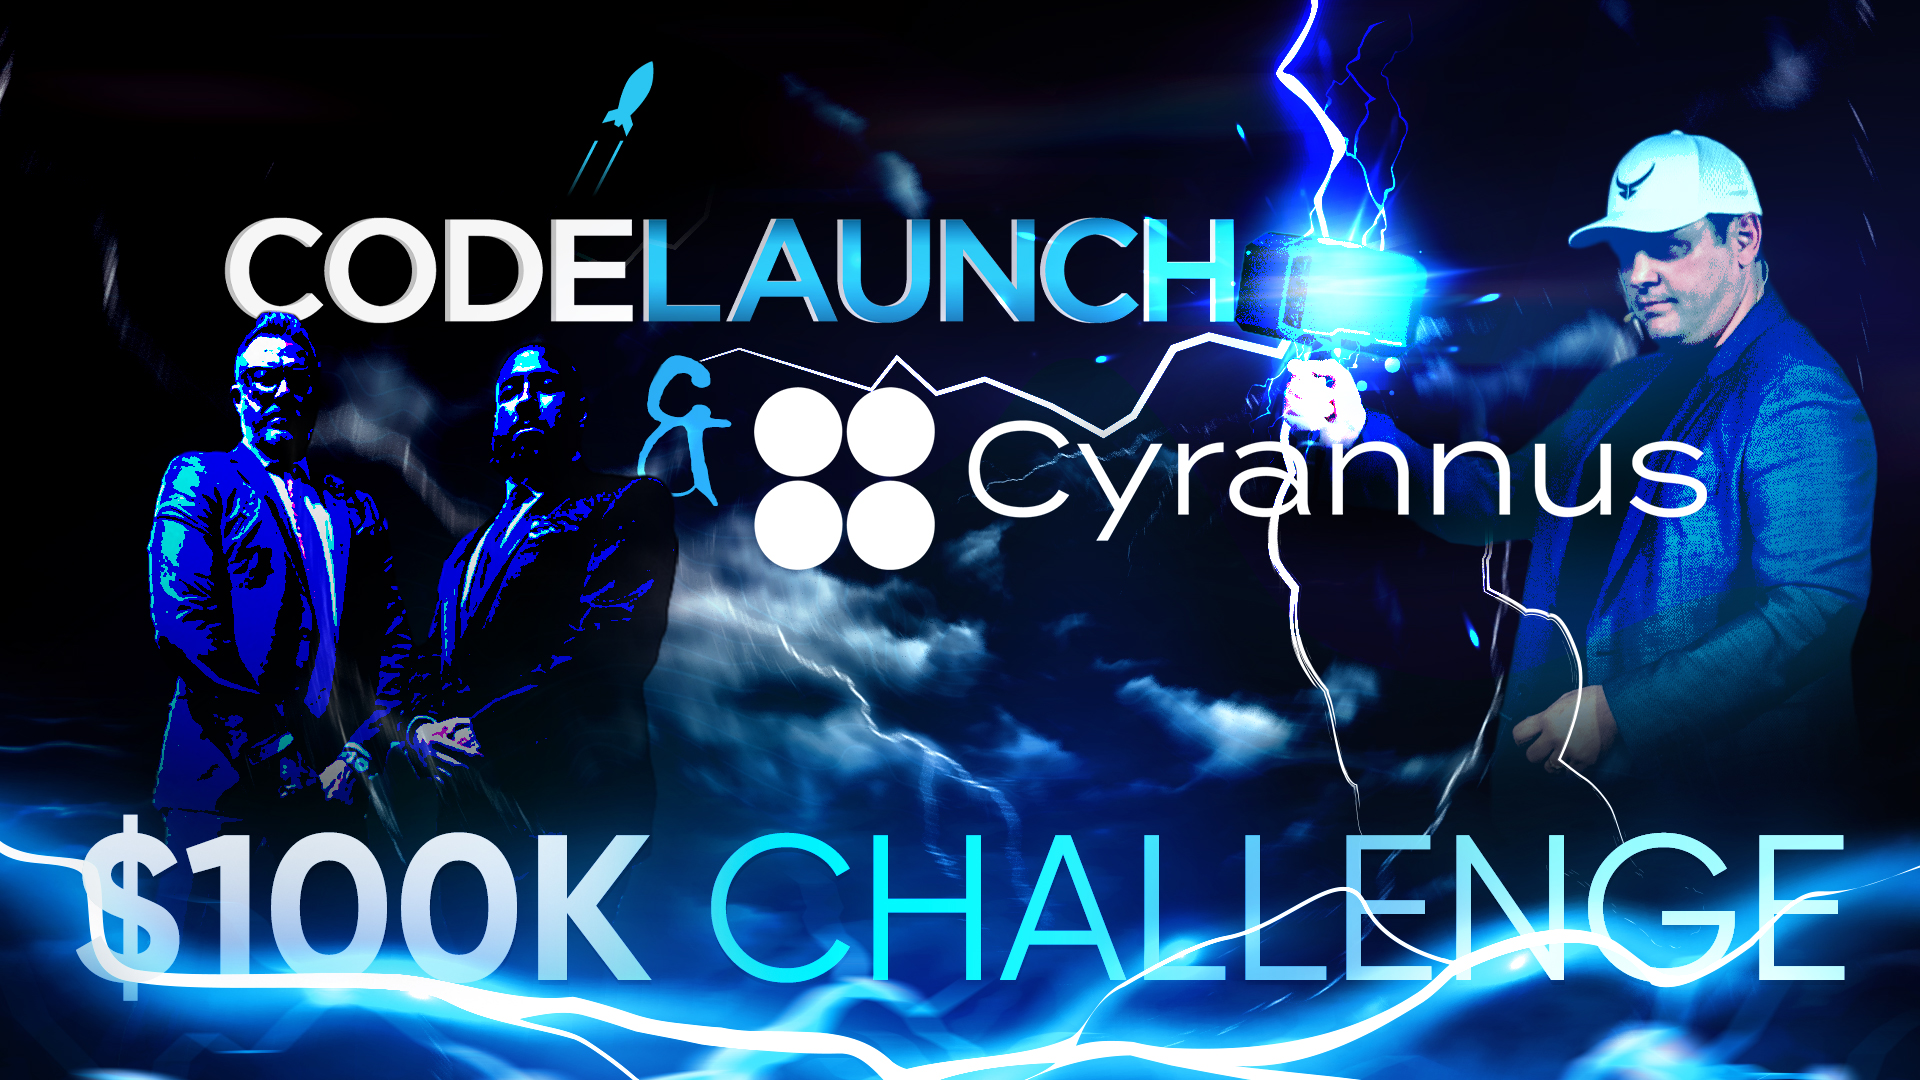 Cyrannus Pledges $150K to a Future CodeLaunch Startup! Could You Be a Winner?